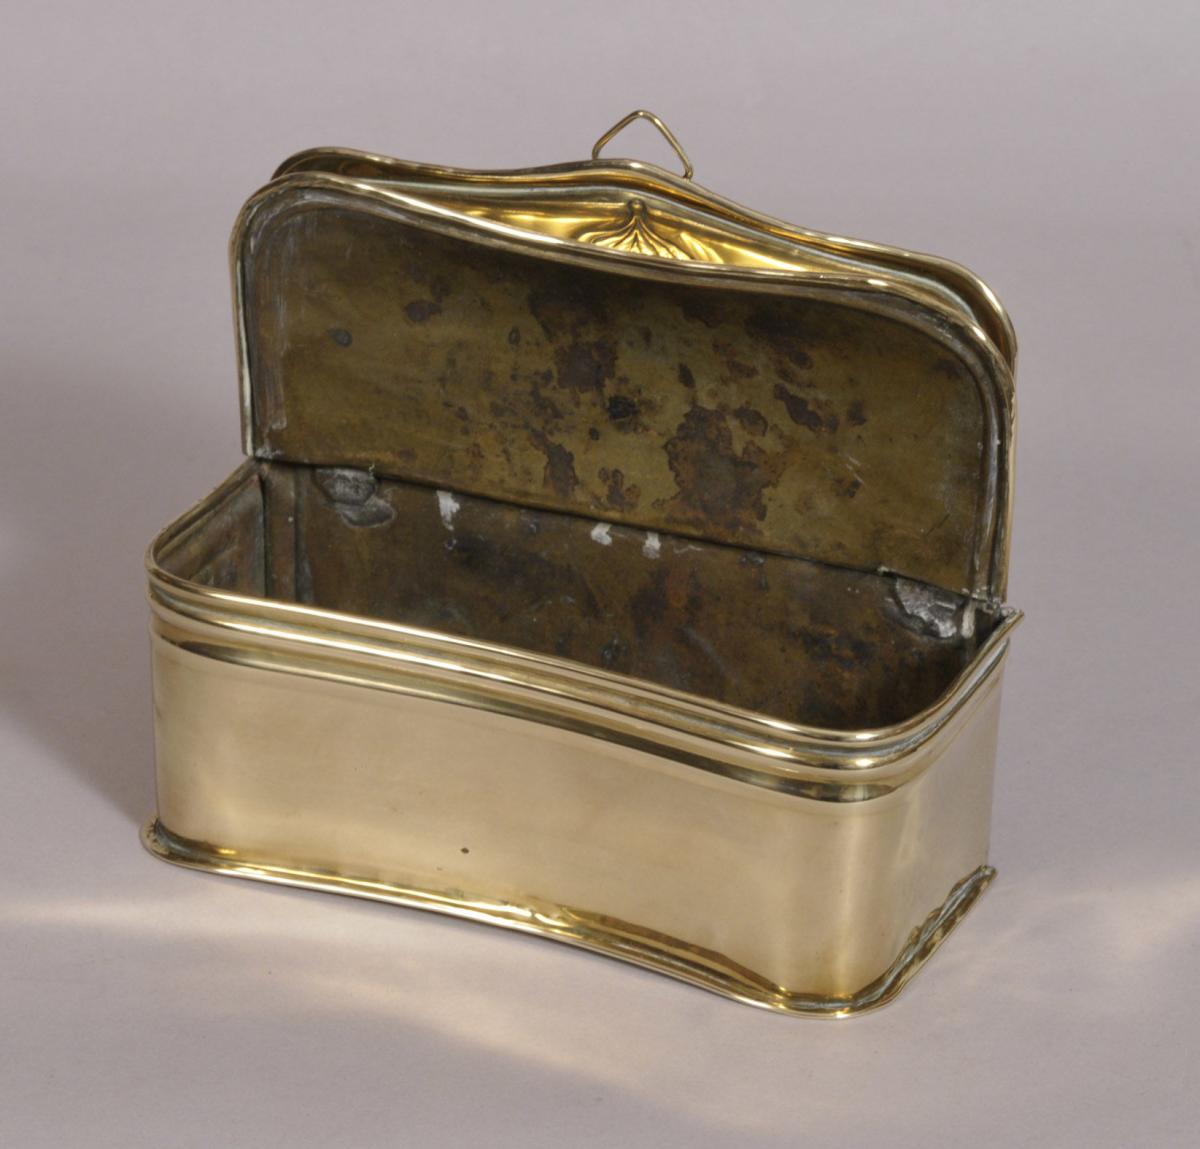 S/3610 Antique 19th Century Brass Candle Box